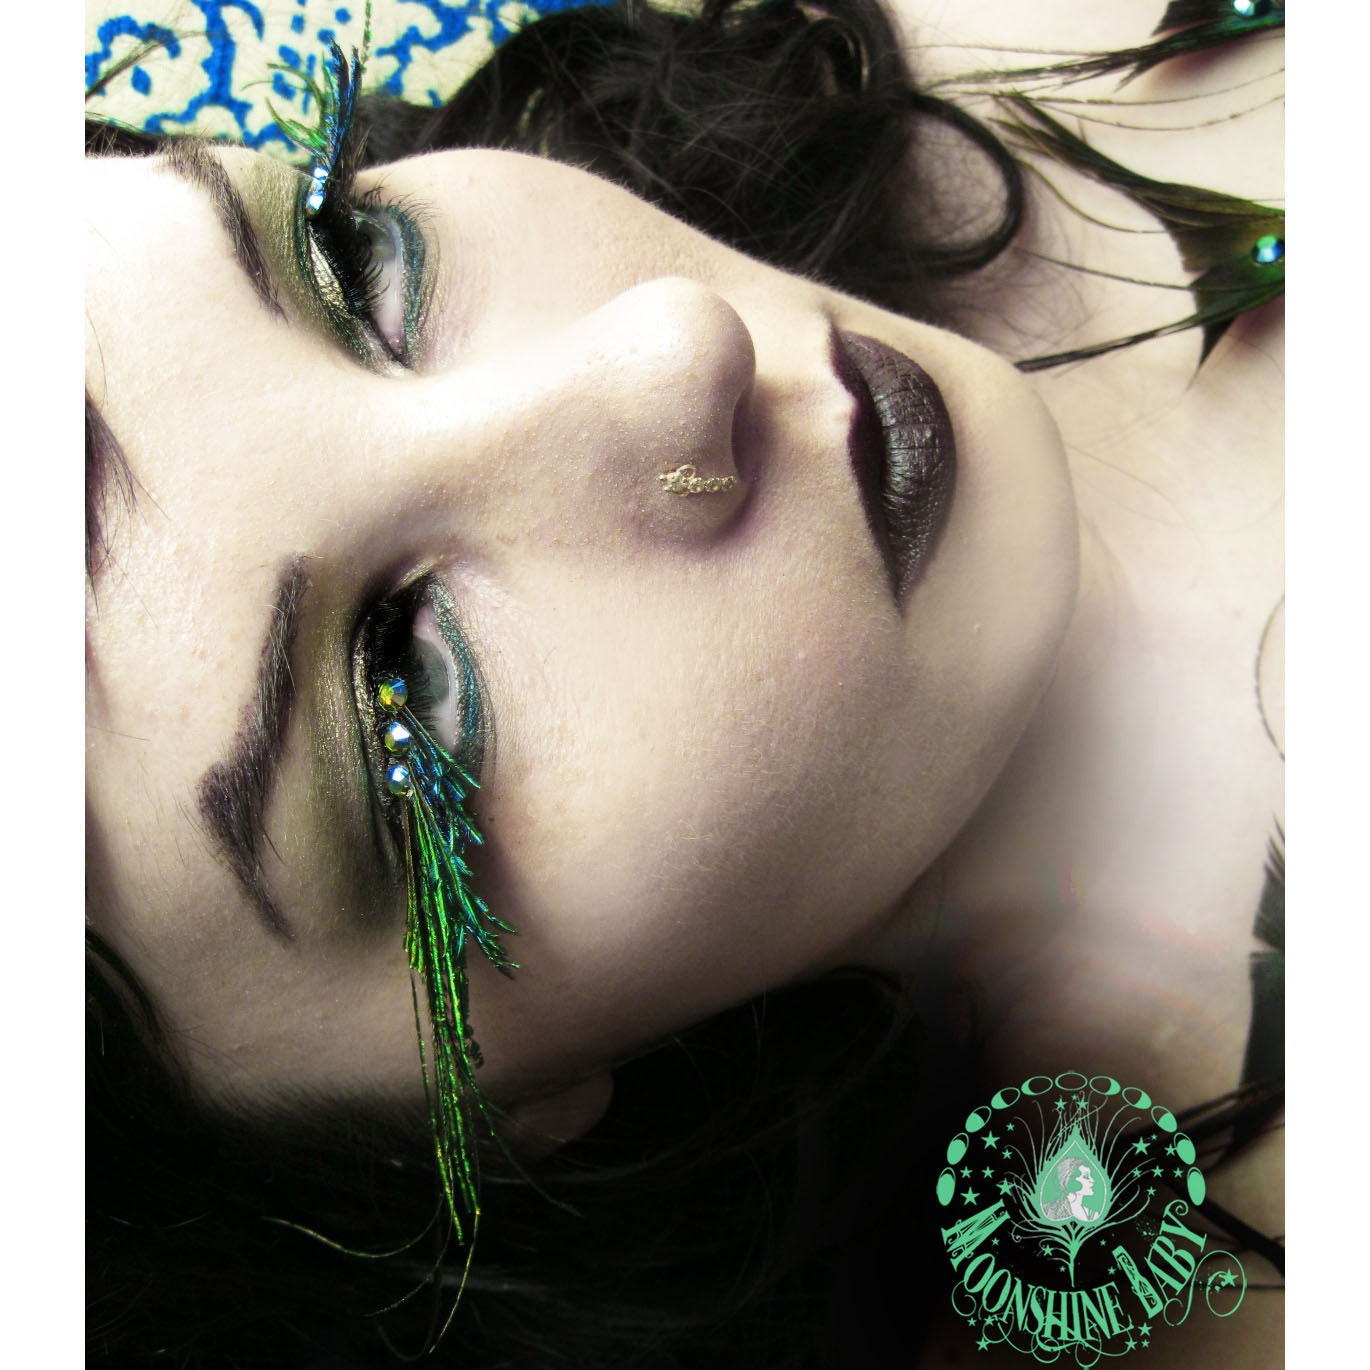 A'Flutter - Exotic Green Peacock Feather Eyelashes w/ Swarovski Crystals - By Moonshine Baby